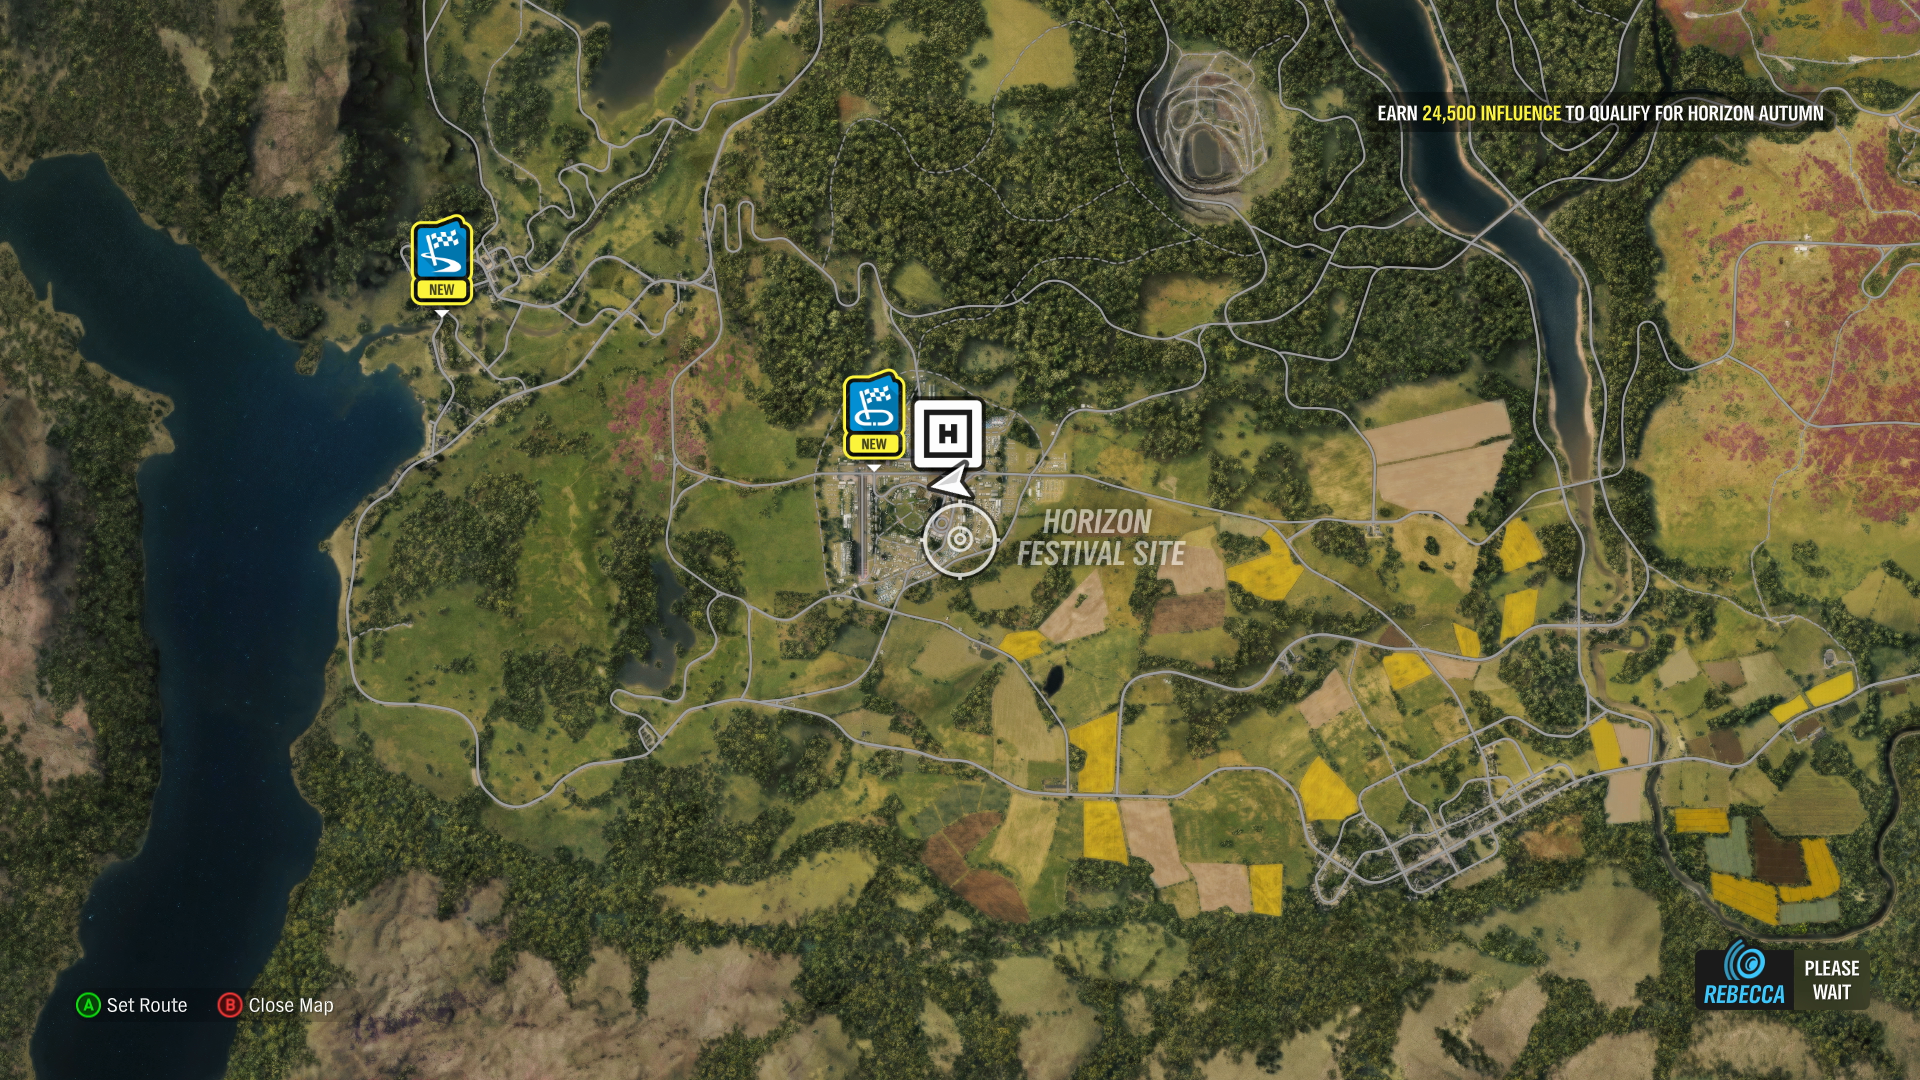 A map from Forza Horizon. There are two race markers on the map outlined in yellow with the word "new" under them. In the bottom-right corner, there's a speaker logo with the name "Rebecca" under it to indicate that Rebecca is speaking.